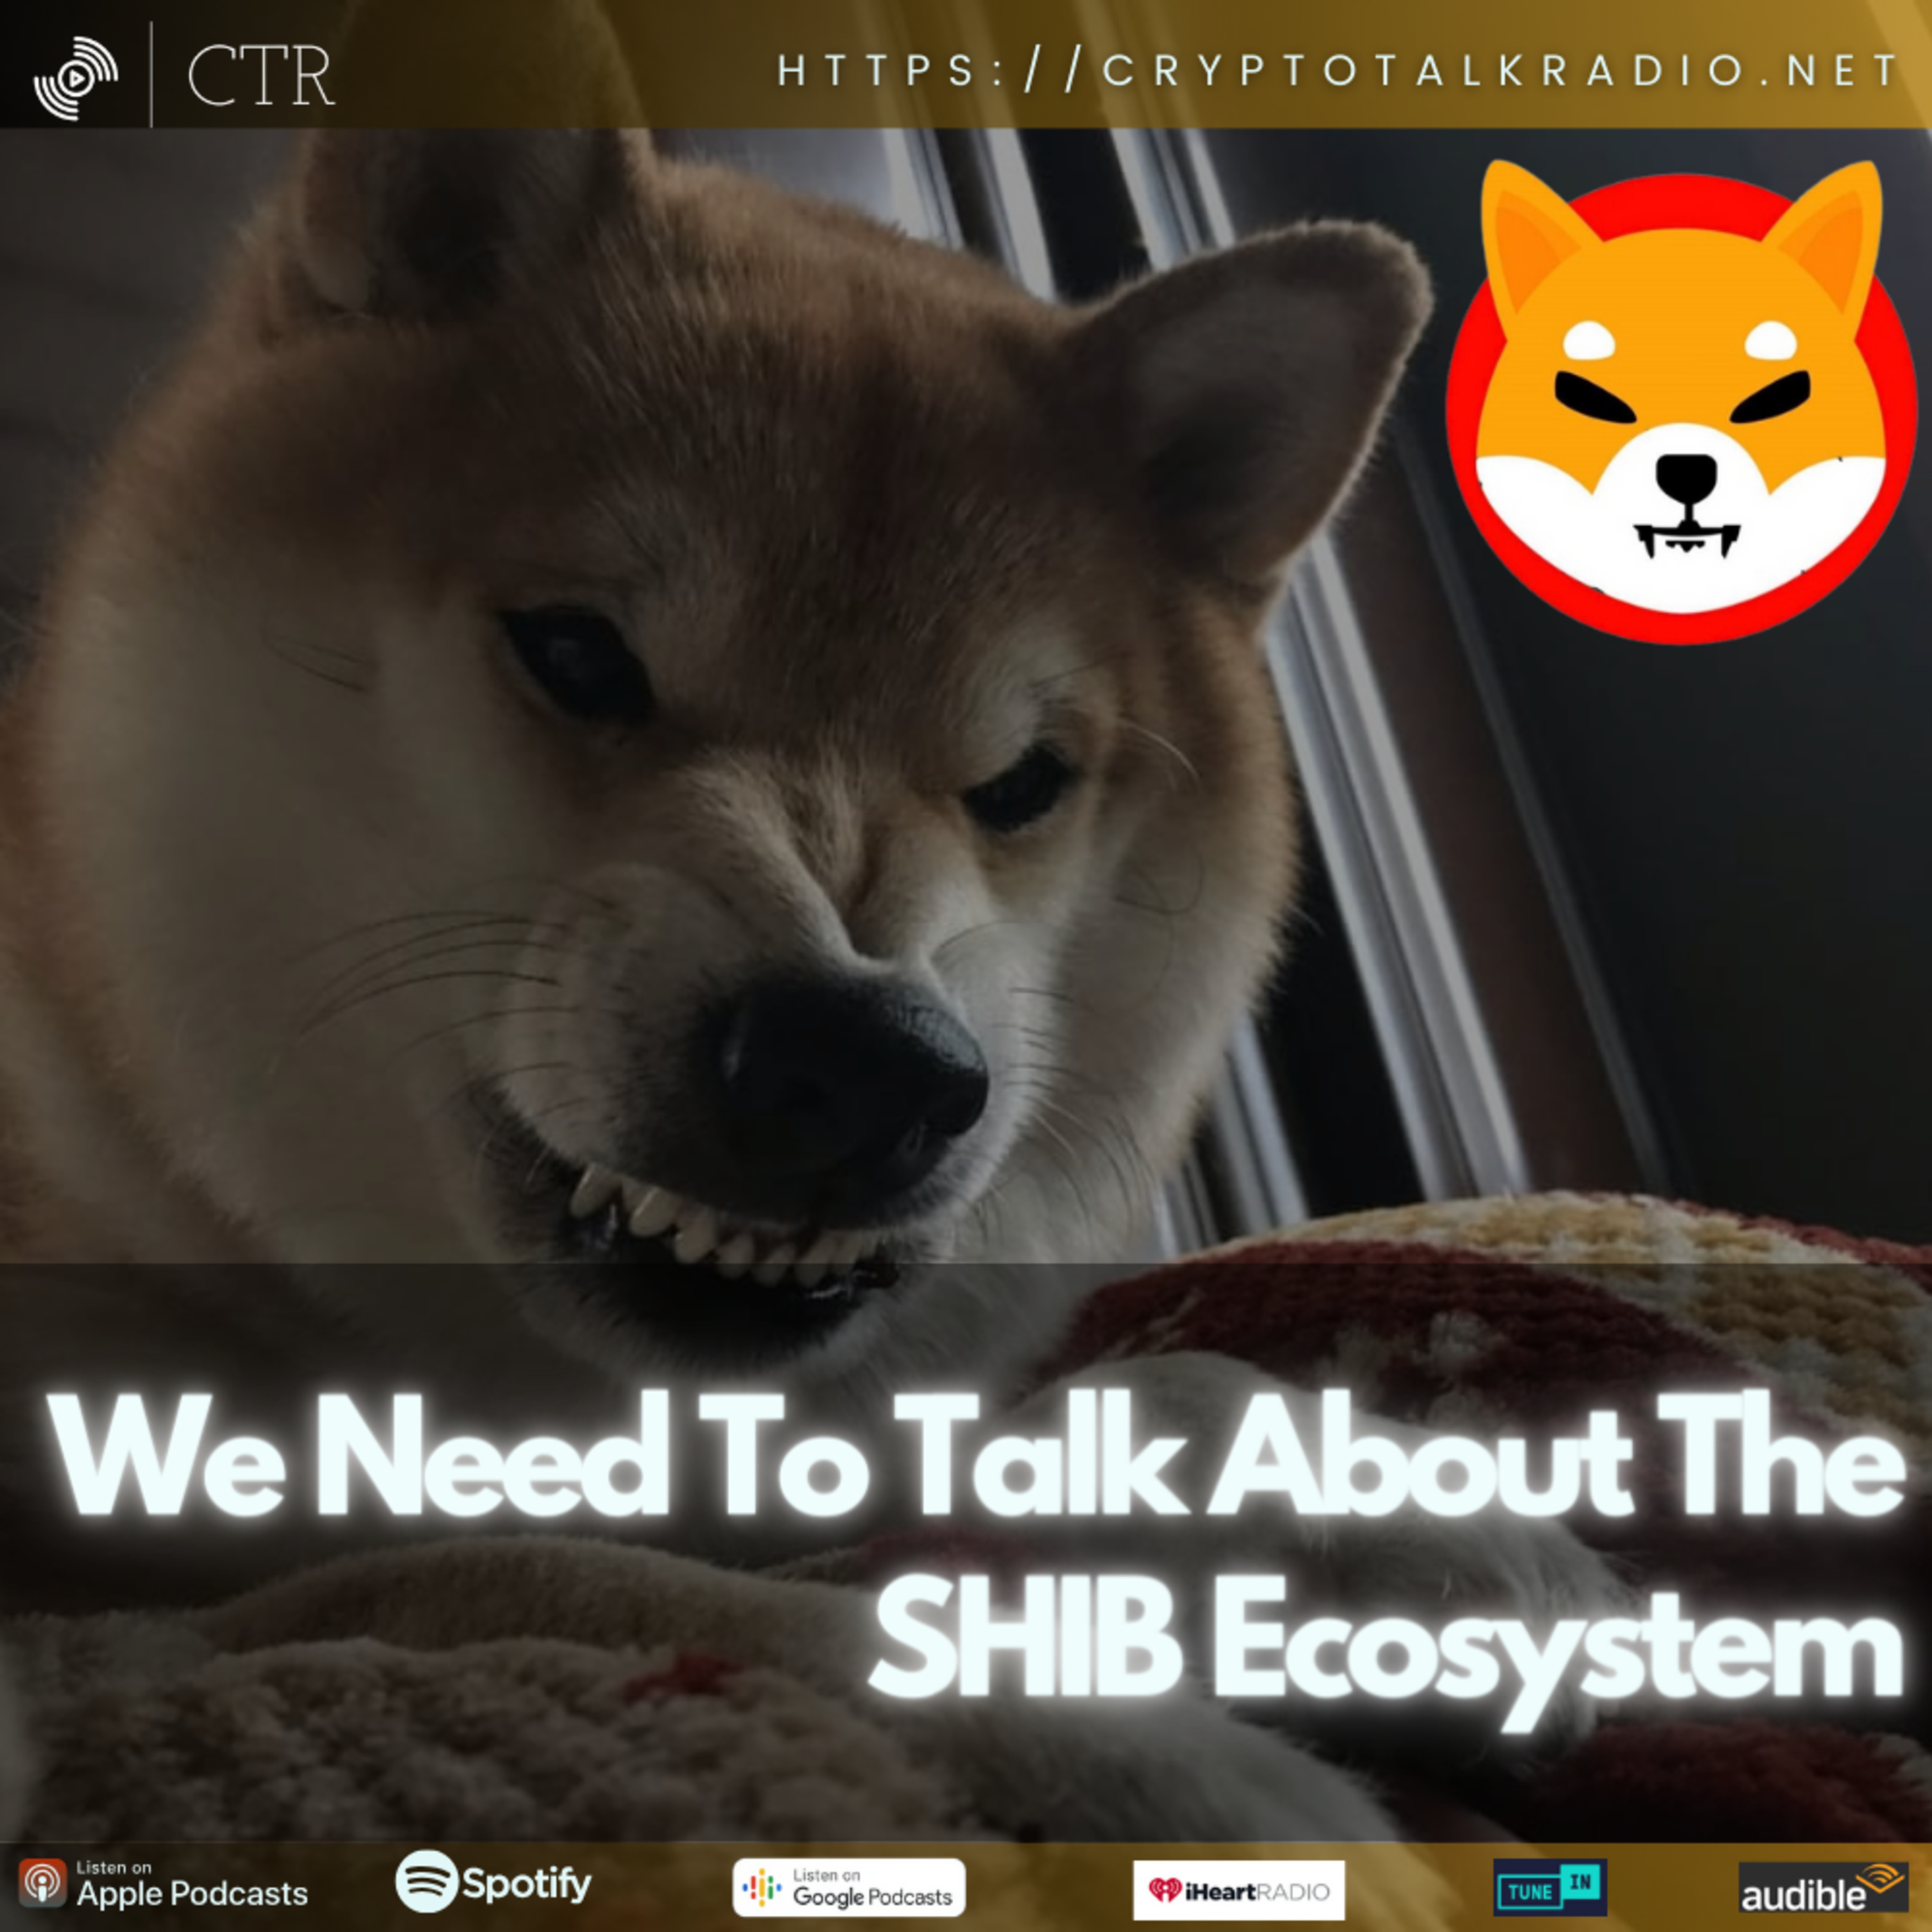 We Need To Talk About The #SHIB Ecosystem